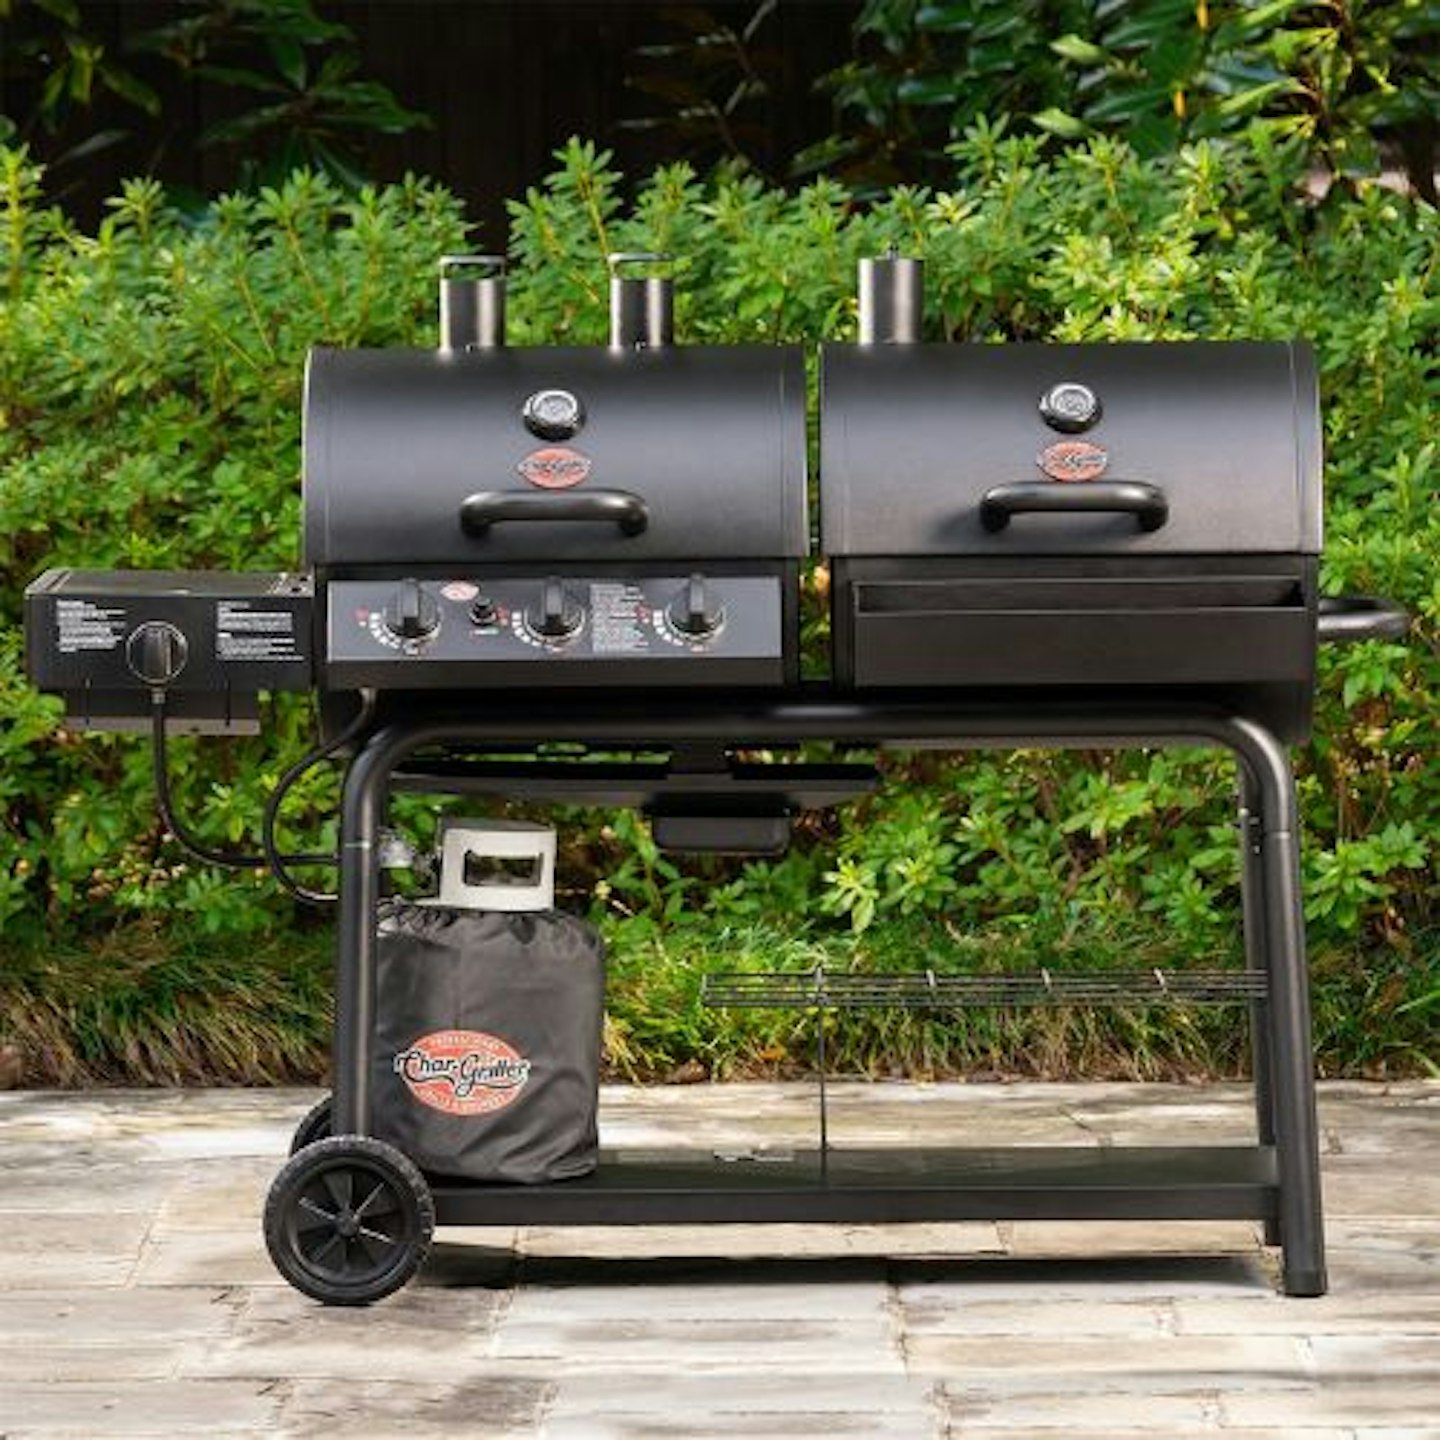 CHAR-GRILLER DUO GAS AND CHARCOAL BARBECUE WITH SIDE BURNER